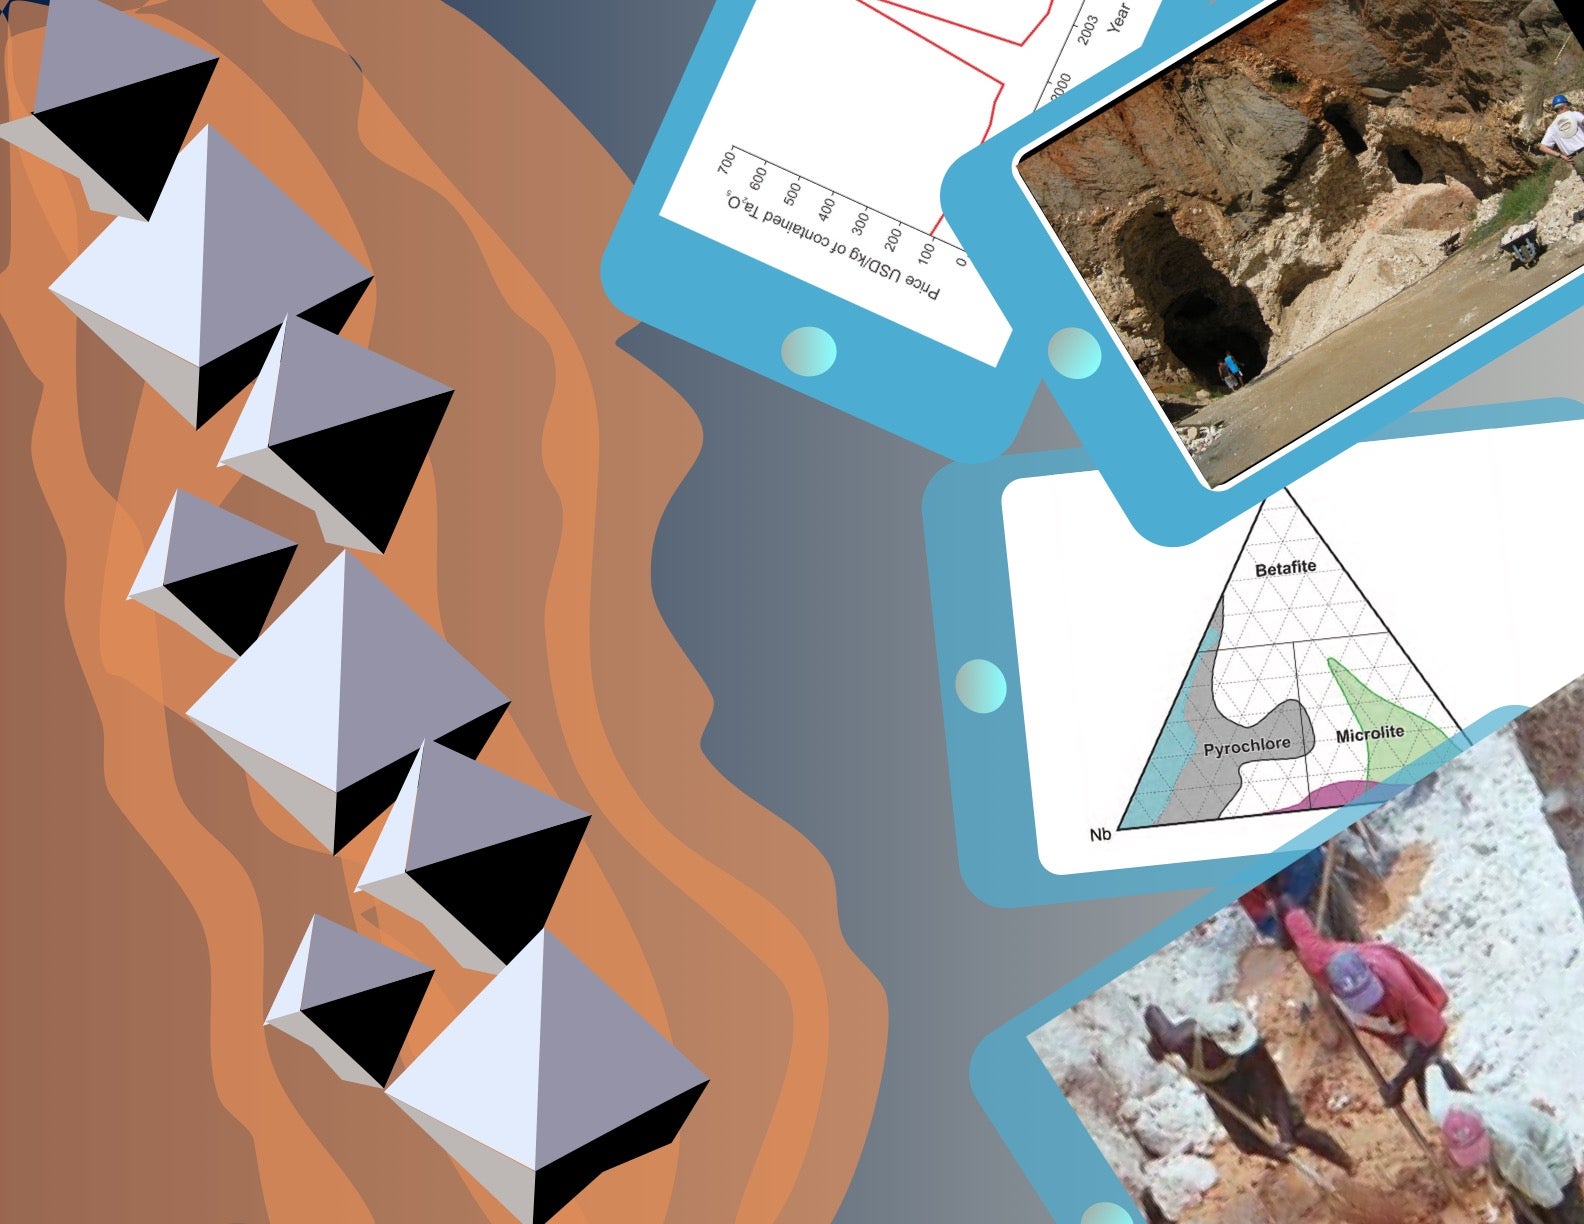 Illustration of octahedrons sticking out of a rock, with photos of researchers beside it